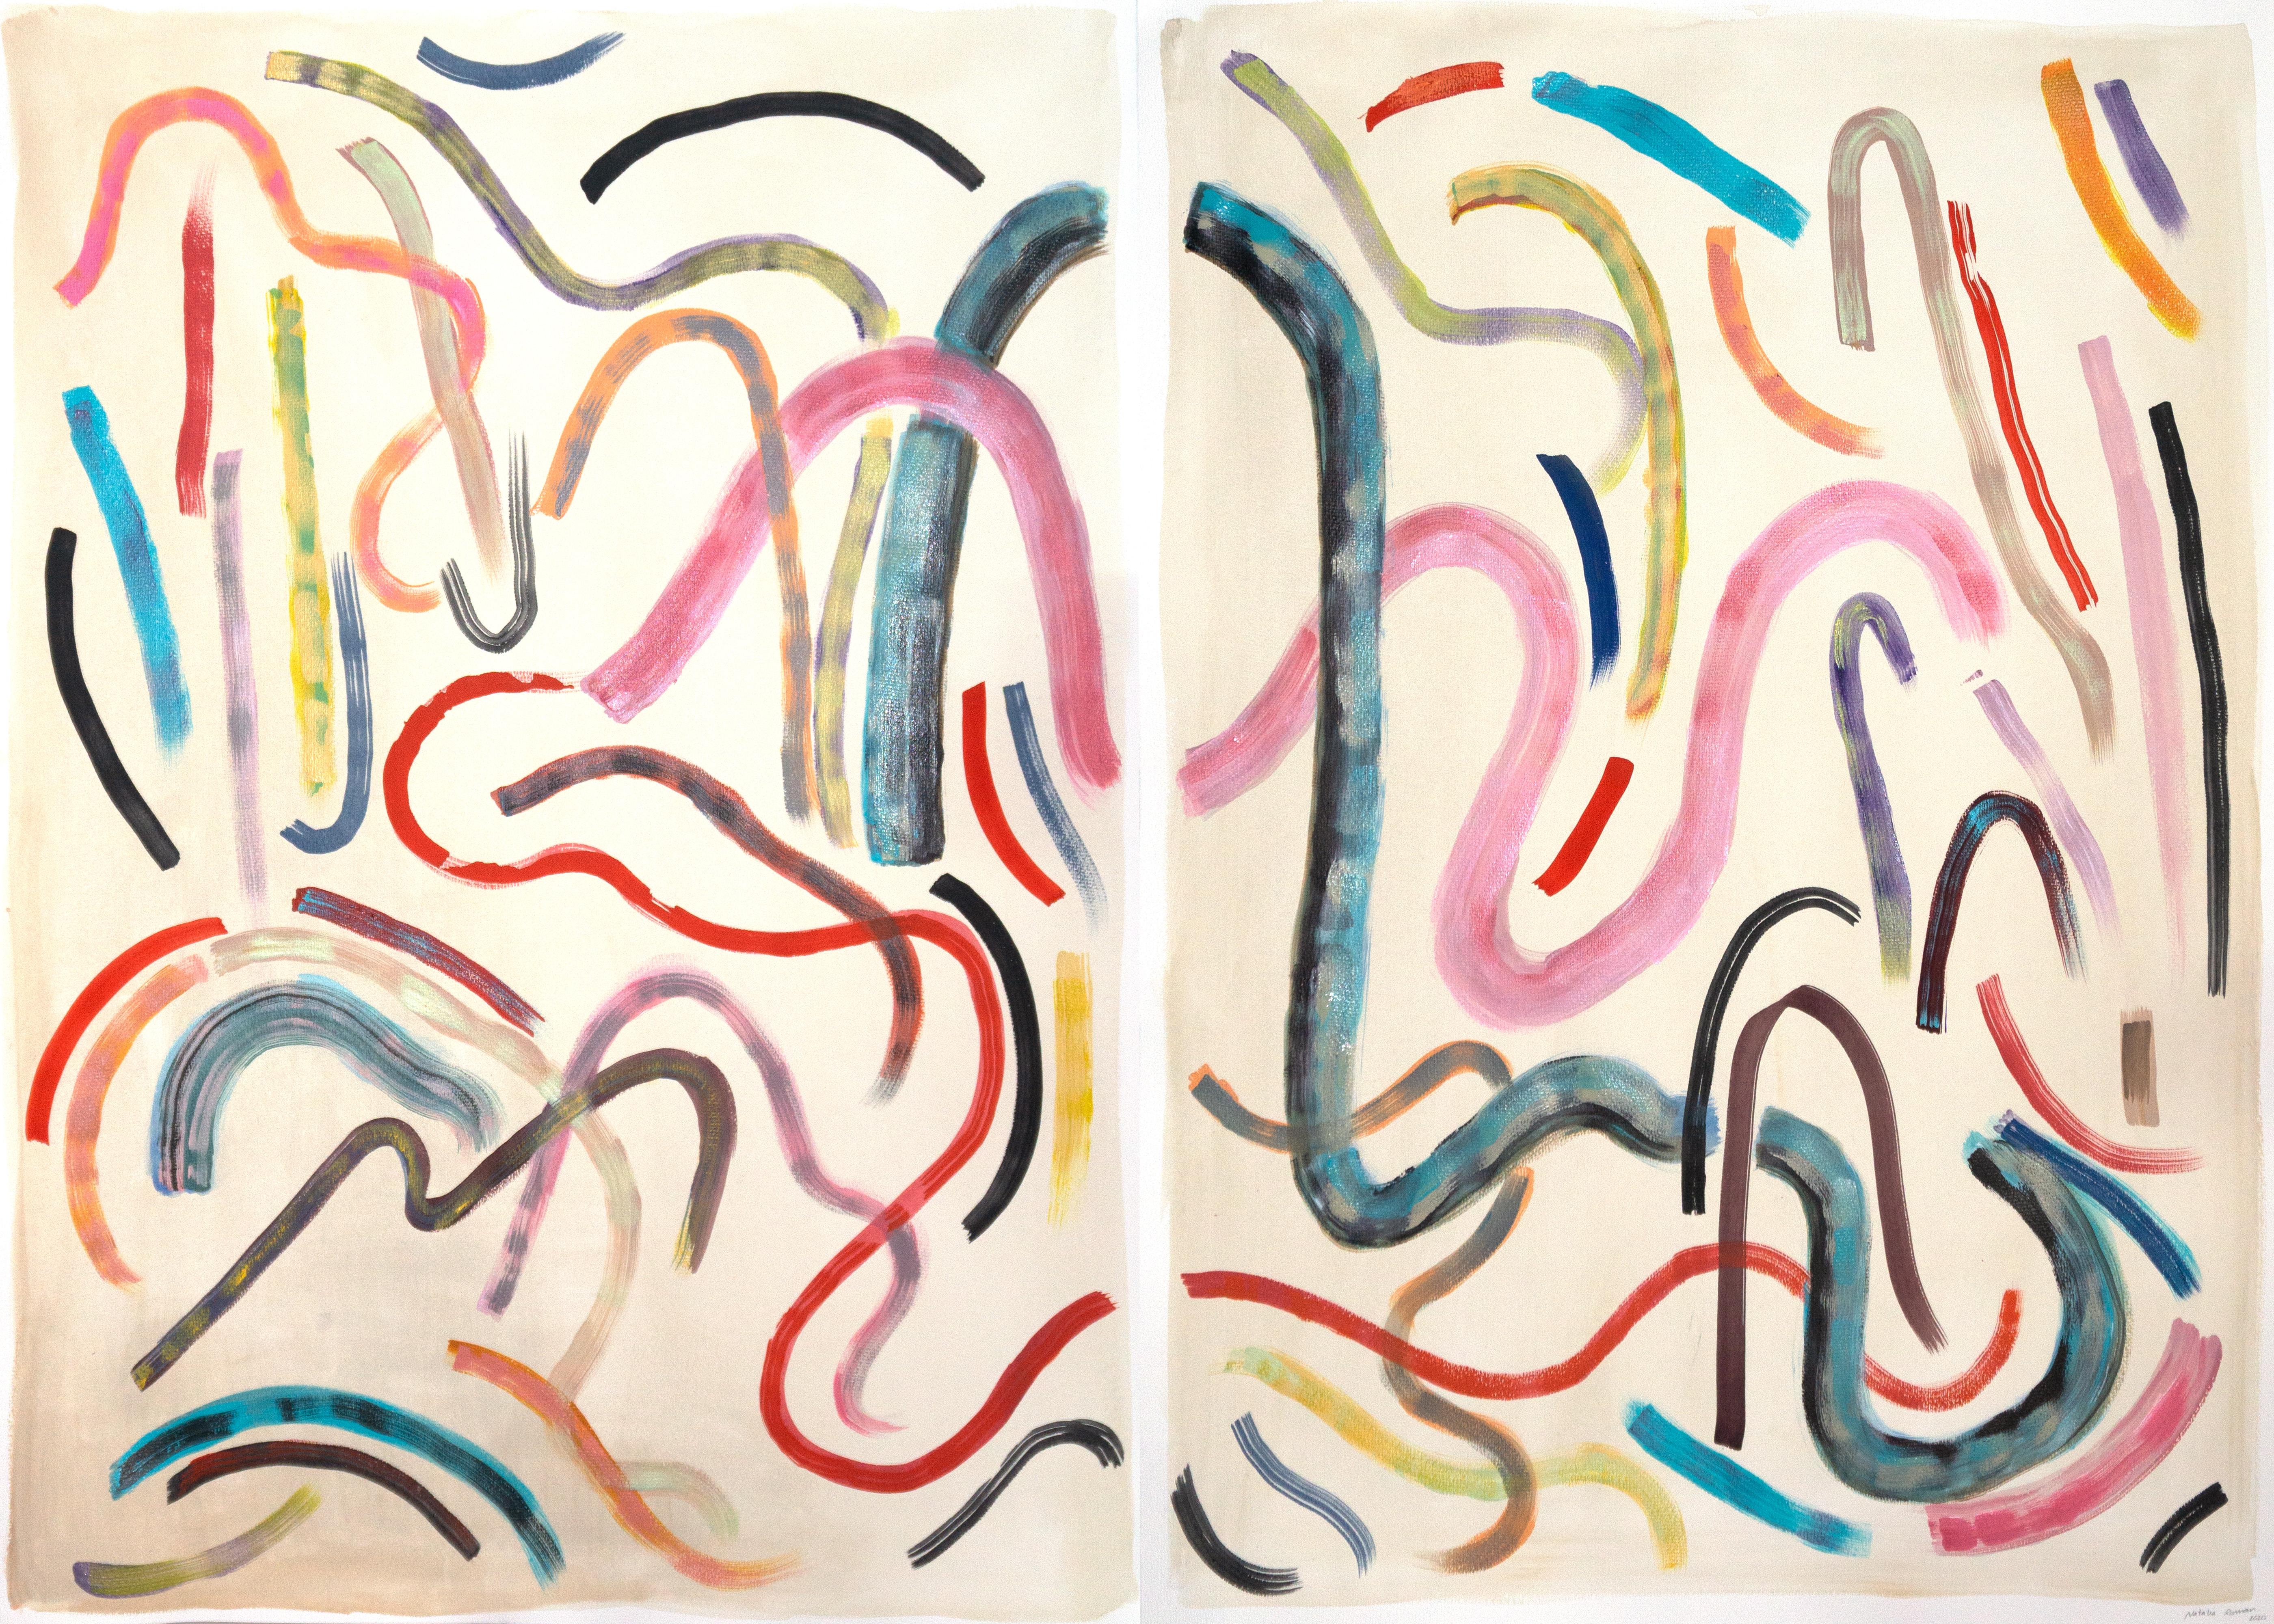 Kind of Cyan Abstract Painting - Loose Colorful Gestures, 100x140 cm Diptych, Mixed Media on Watercolor Paper